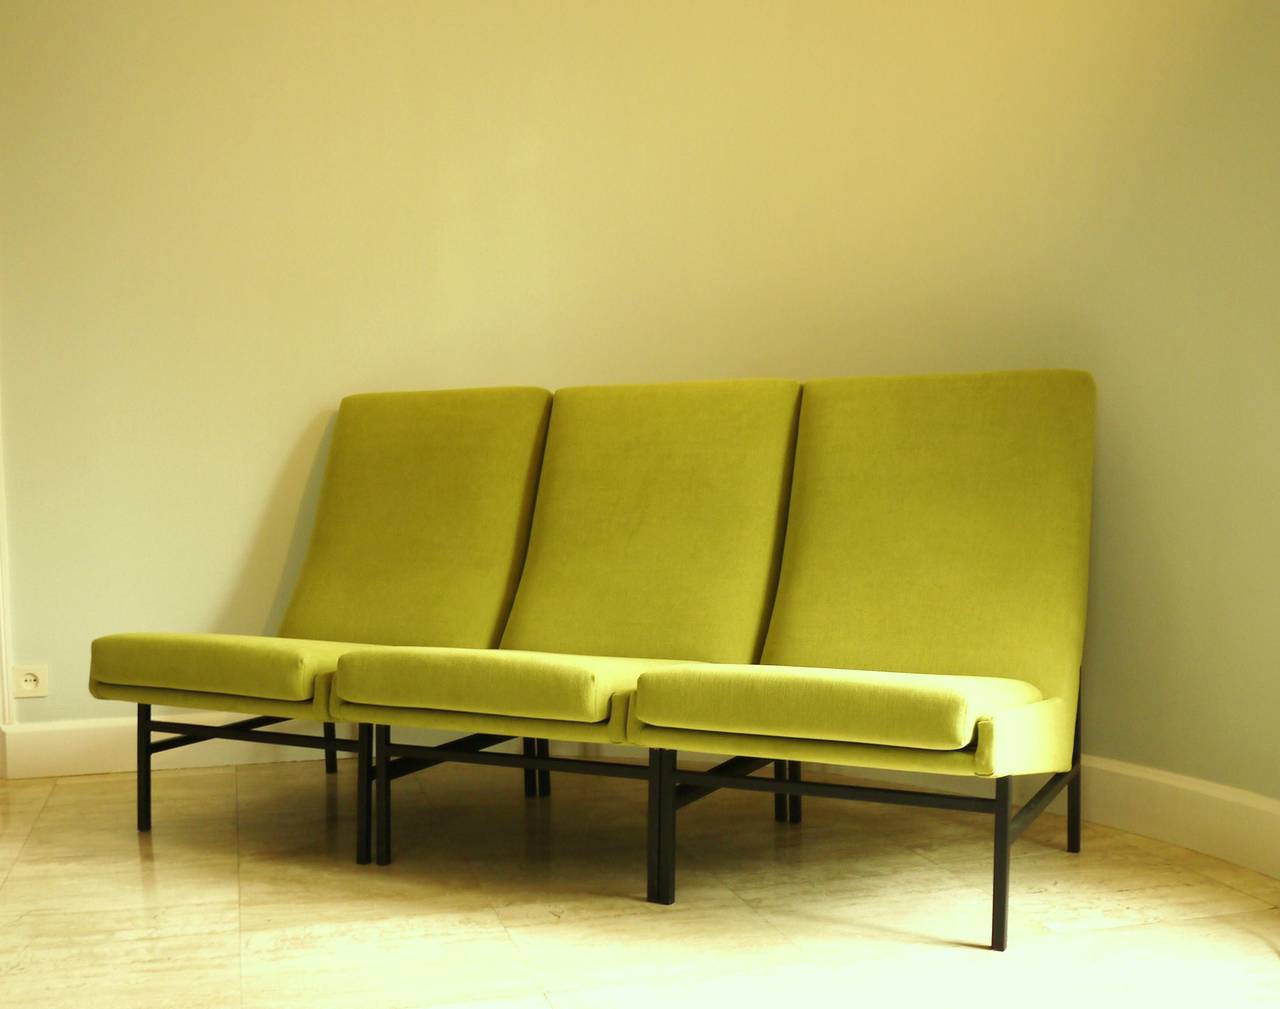 Set of three chairs, model 642 by ARP for Steiner editor in 1955. They can be pushed together into a single sofa, or separated into individual lounge chairs. Black lacquered frame. Restored foam and fabric (sort of light green velvet).